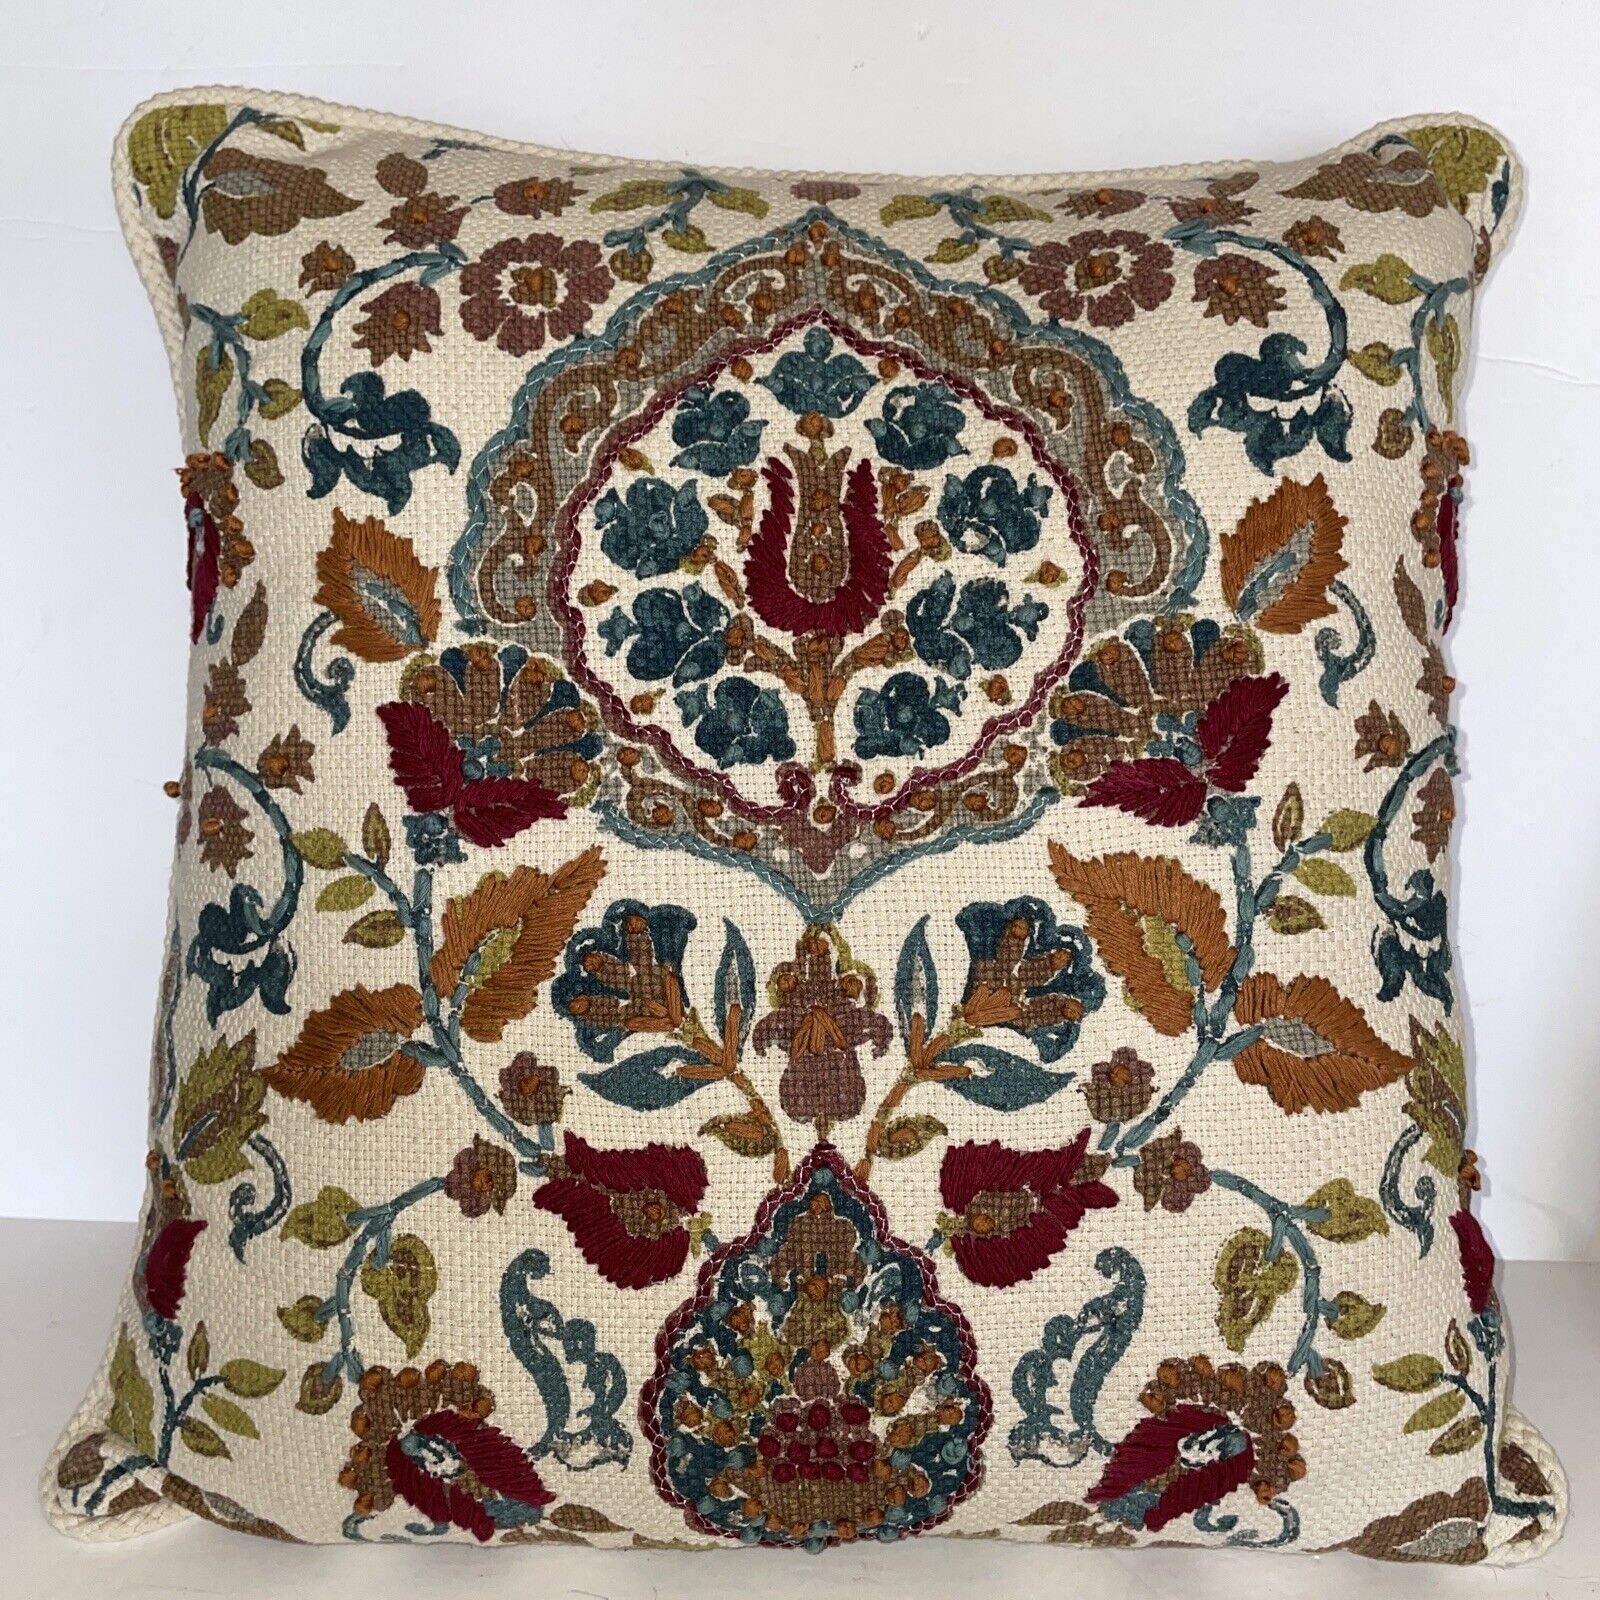 Two Surya Global BOHO Embroidered Decorative Pillow Covers 18”x18” Back Zip￼